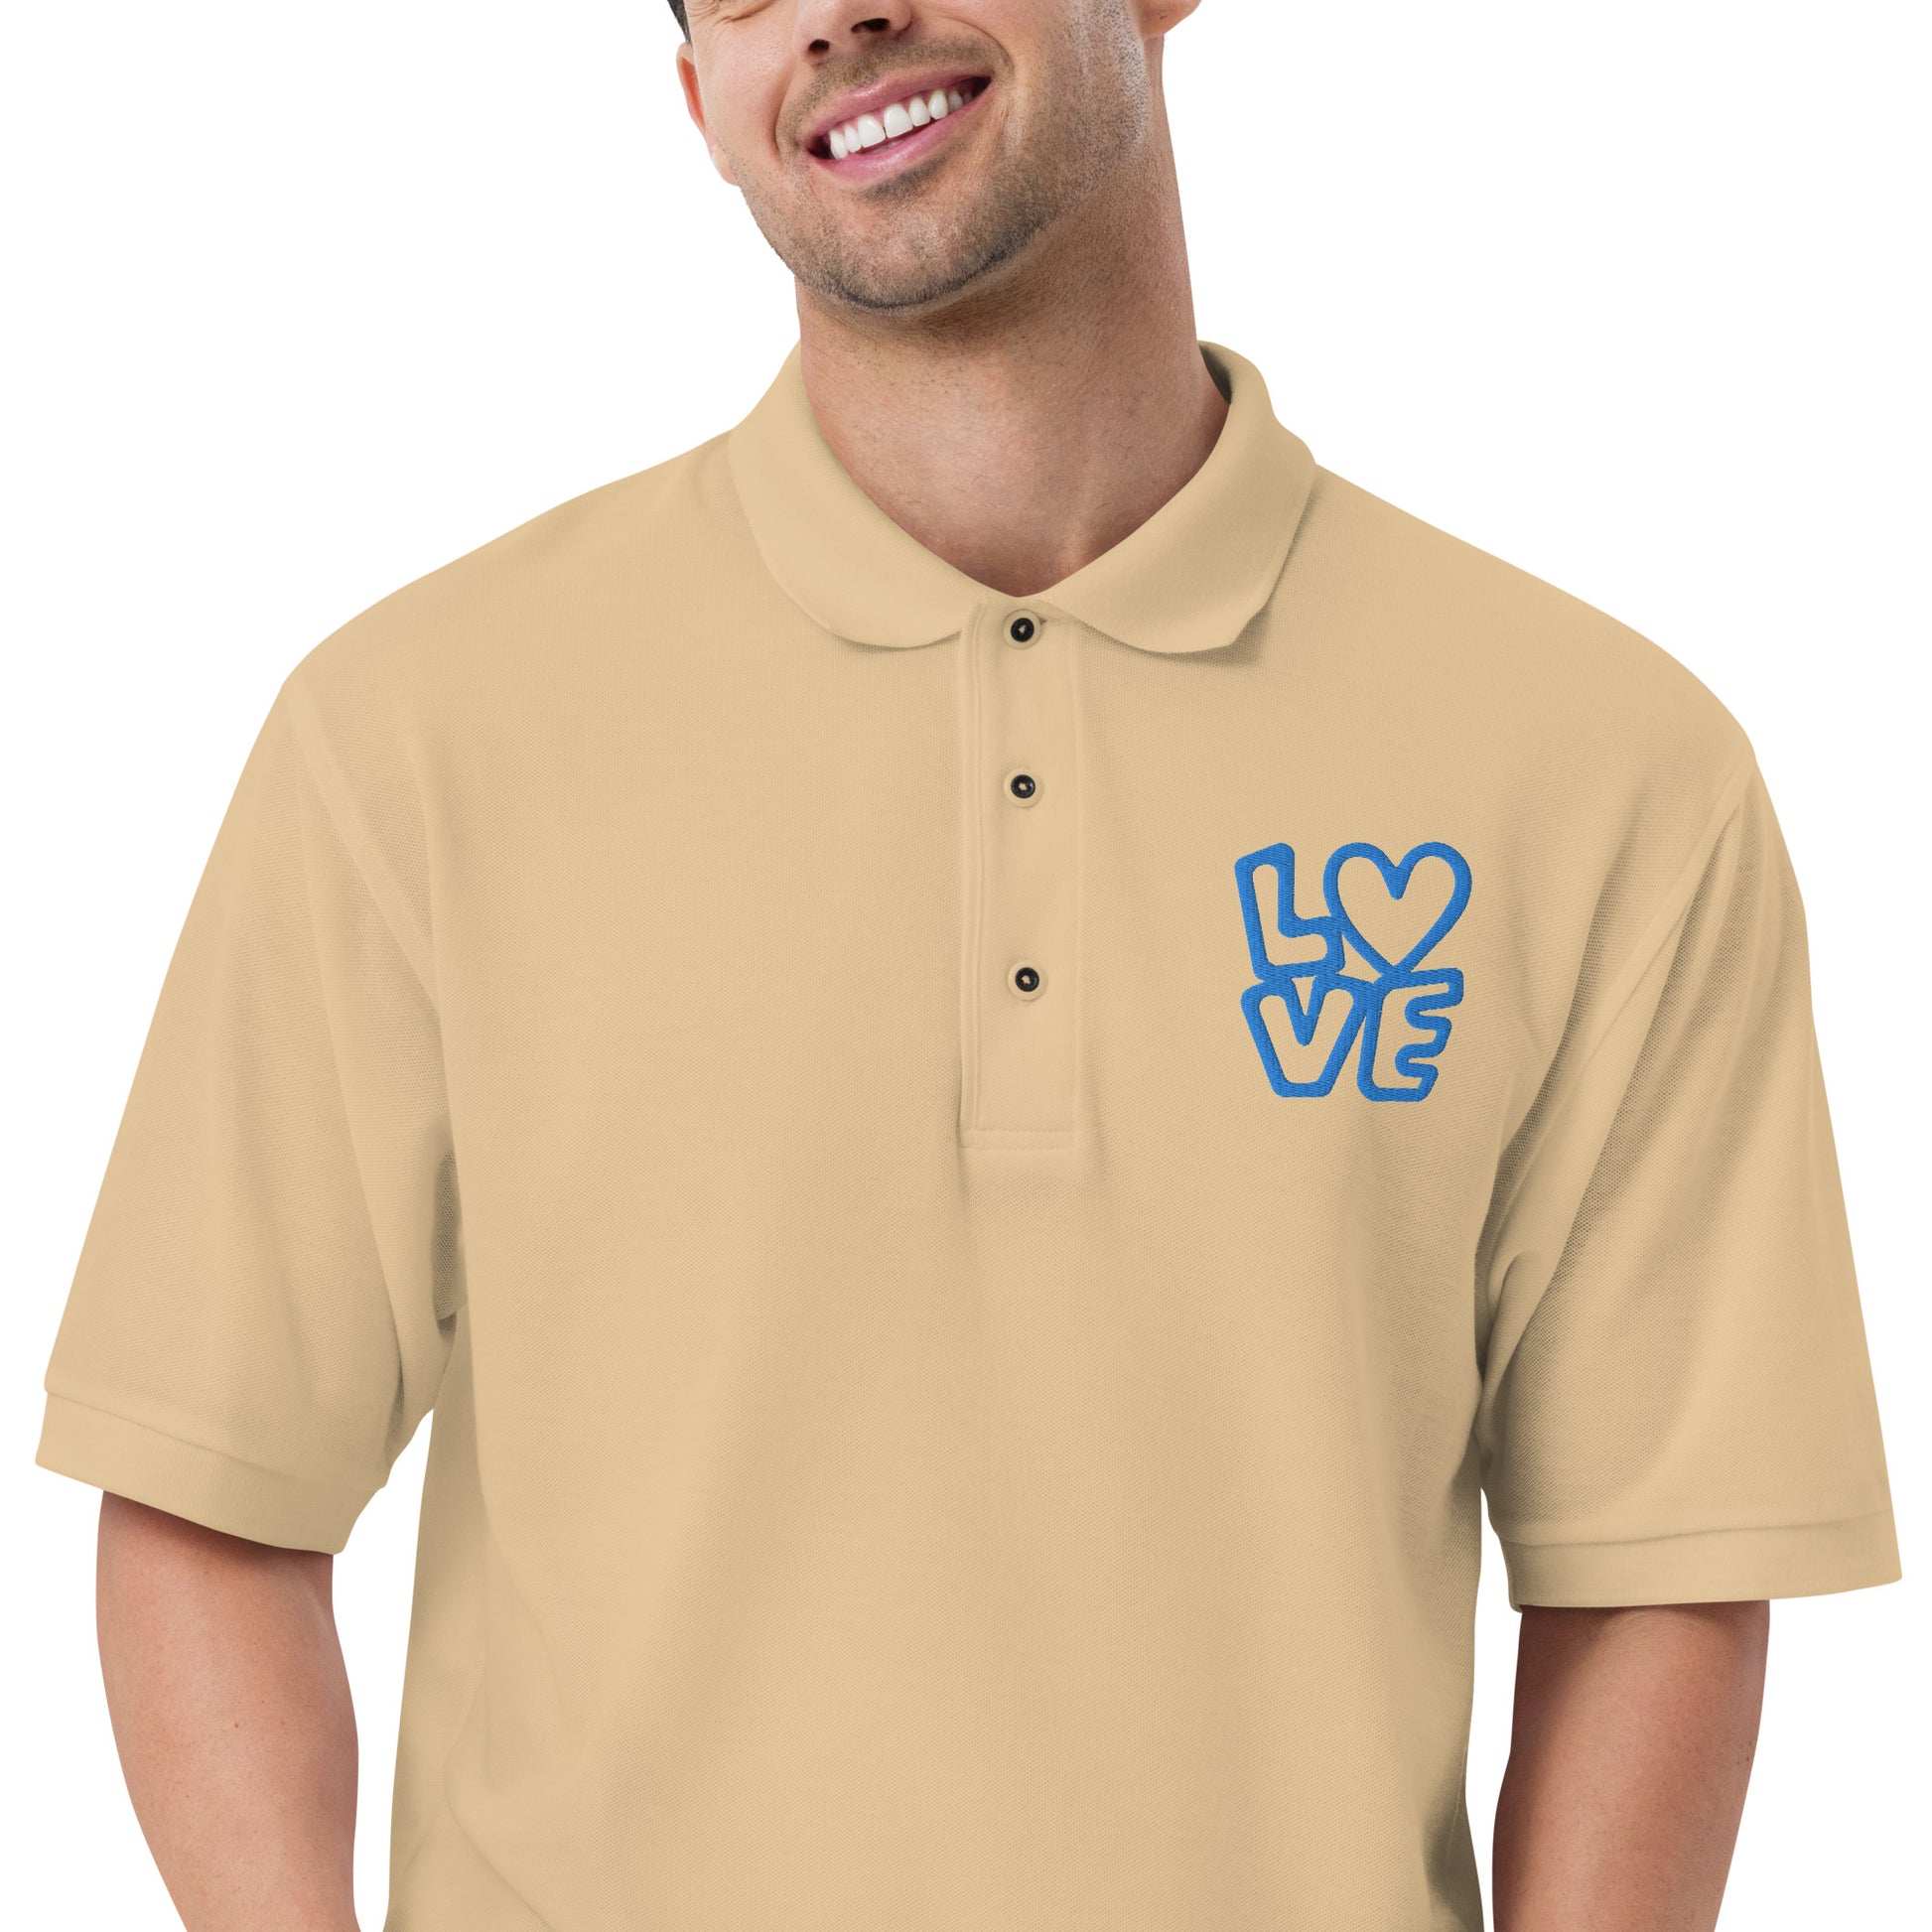 Men with stone poloshirt with the blue letters LOVE with the O in heart shape